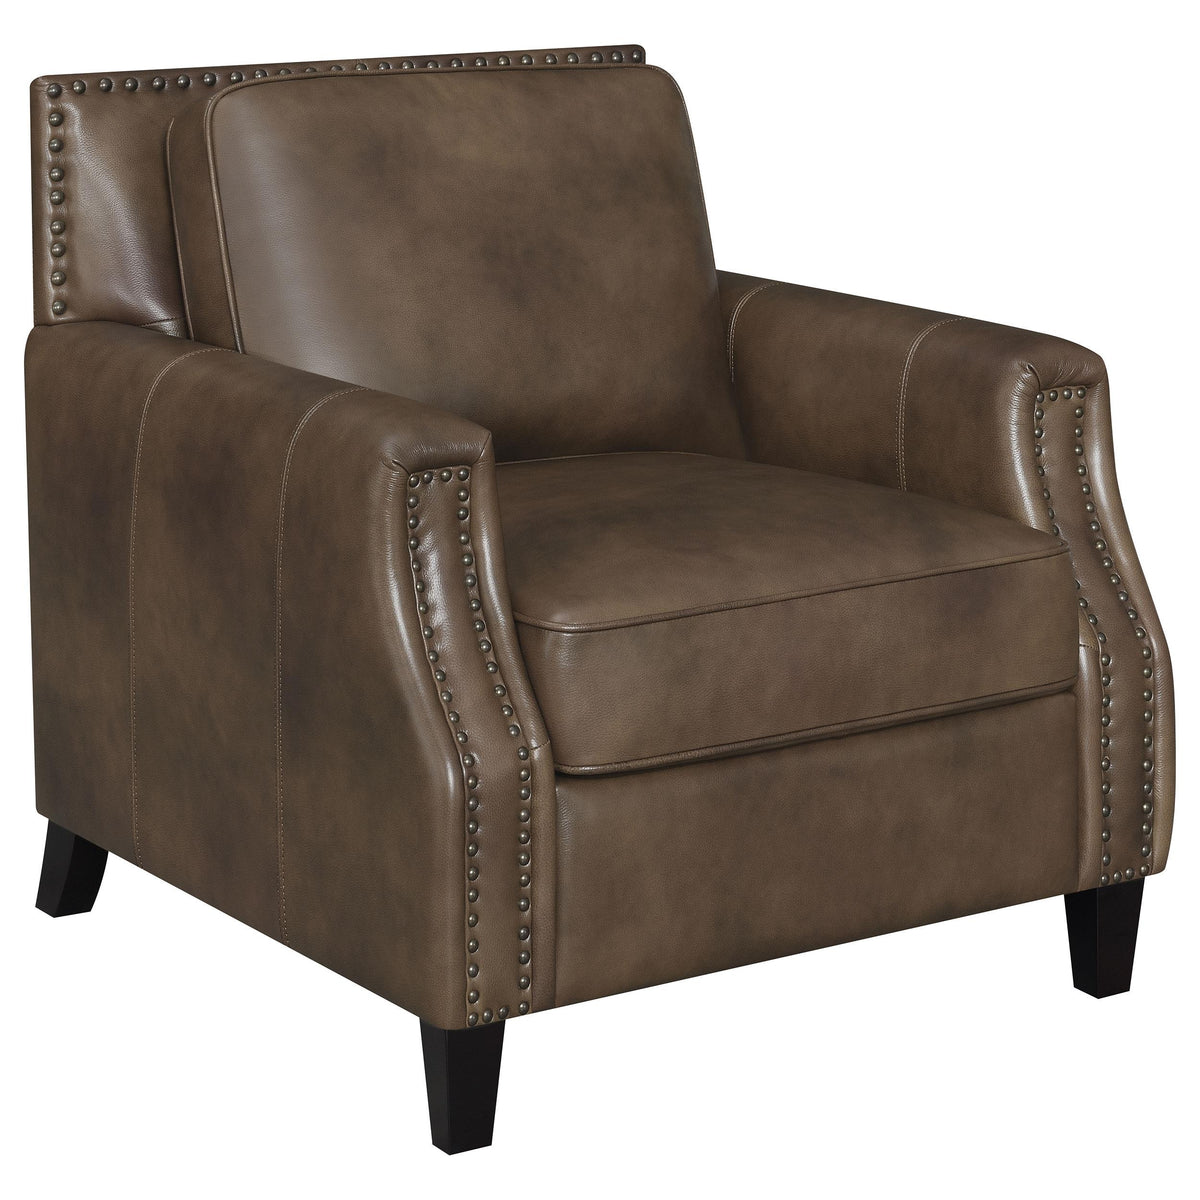 Leaton Upholstered Recessed Arm Chair Brown Sugar  Half Price Furniture